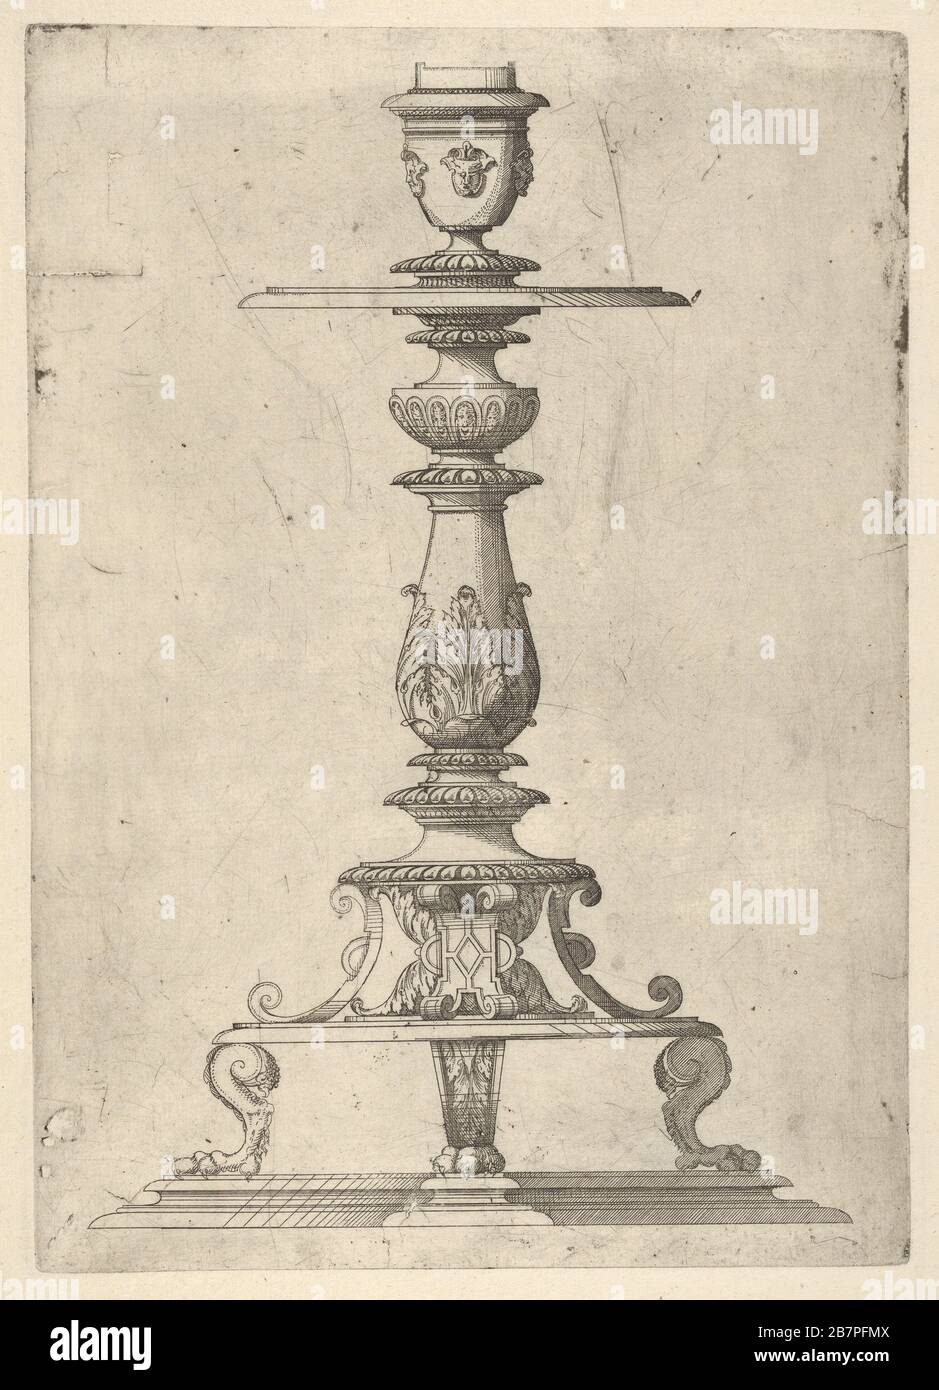 Design for a Candlestick, 1548-49. Stock Photo